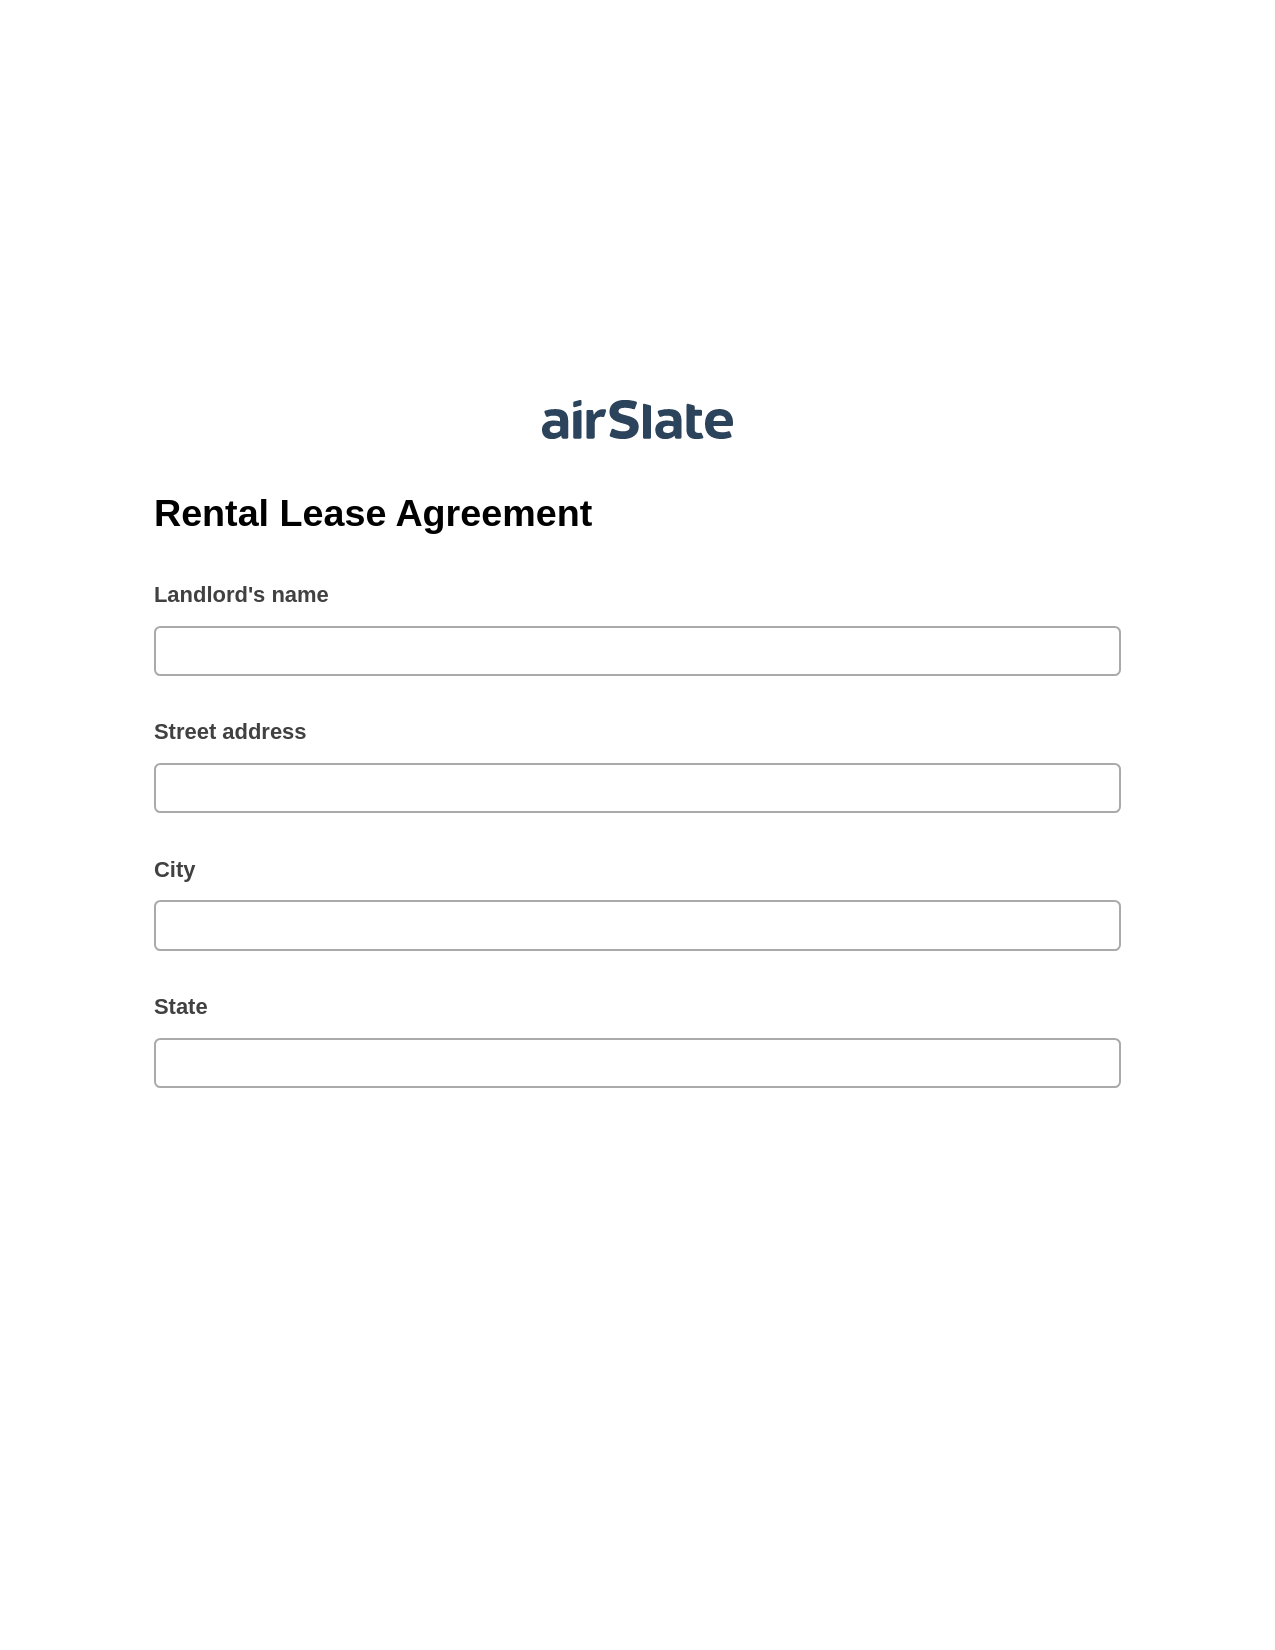 Multirole Rental Lease Agreement Pre-fill from Excel Spreadsheet Dropdown Options Bot, System Bot - Create a Slate in another Flow, Export to Excel 365 Bot